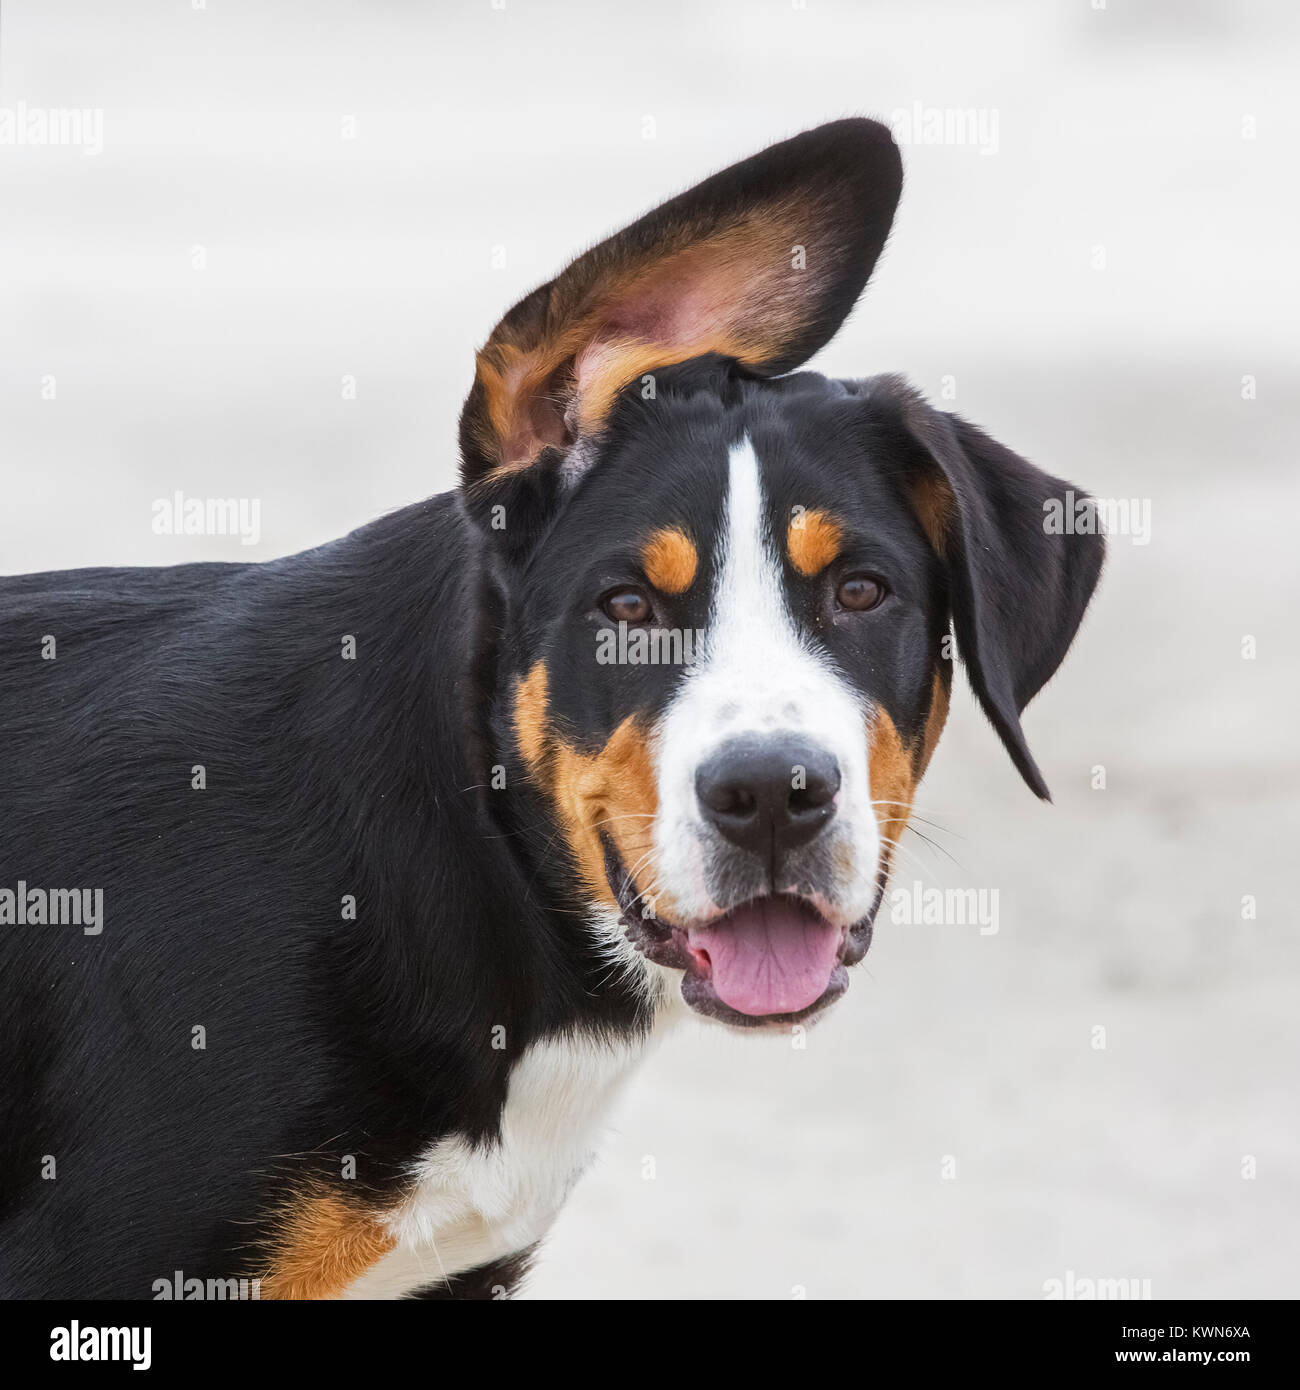 Funny close up portrait of young Greater Swiss Mountain Dog / Grosser Schweizer Sennenhund Stock Photo